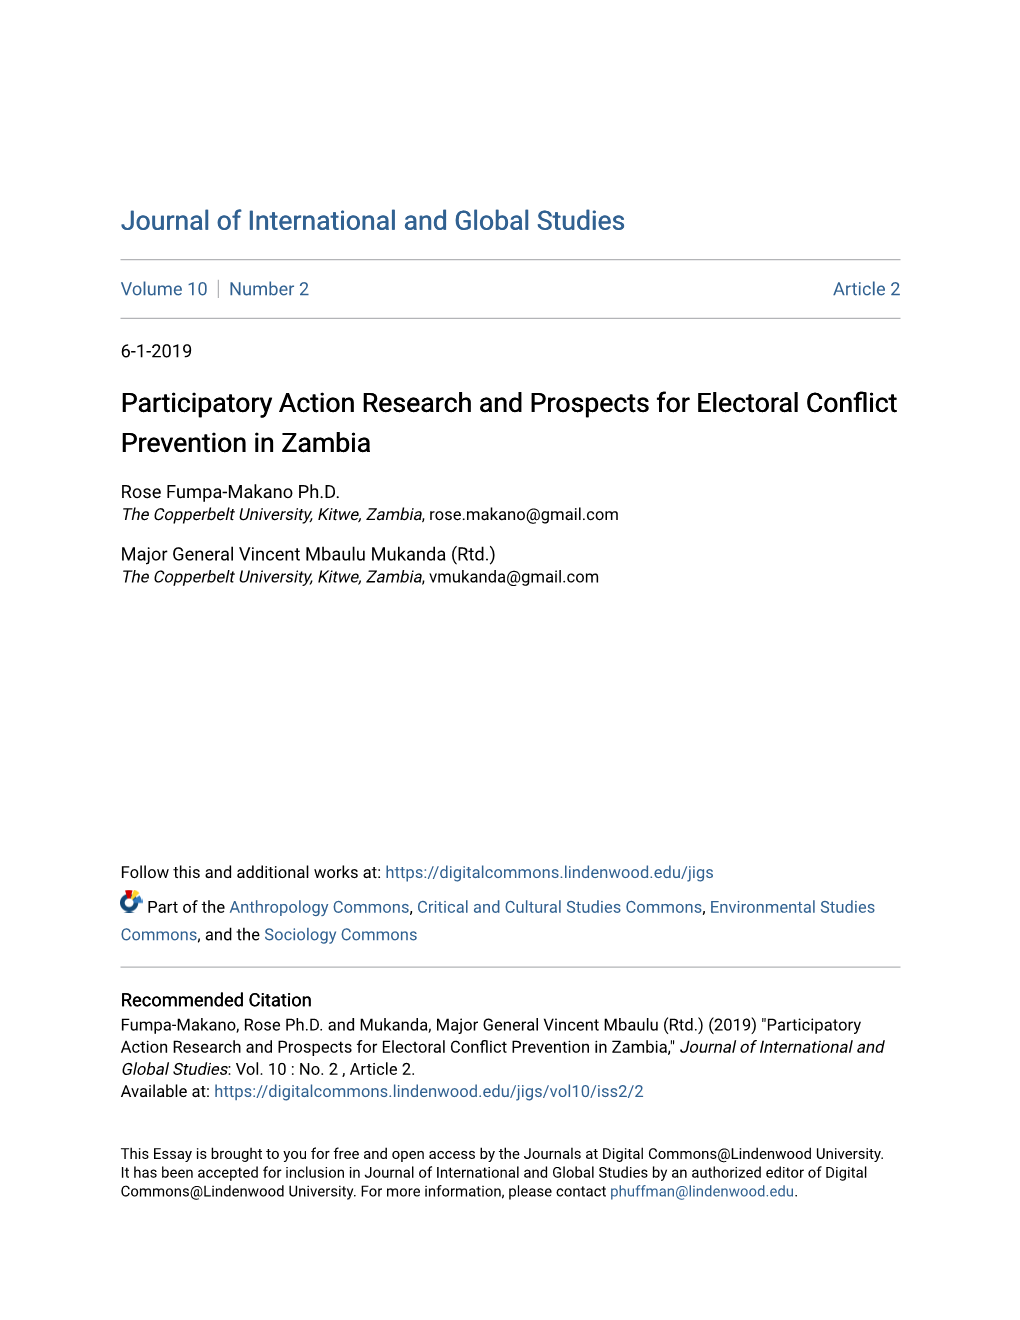 Participatory Action Research and Prospects for Electoral Conflict Prevention in Zambia